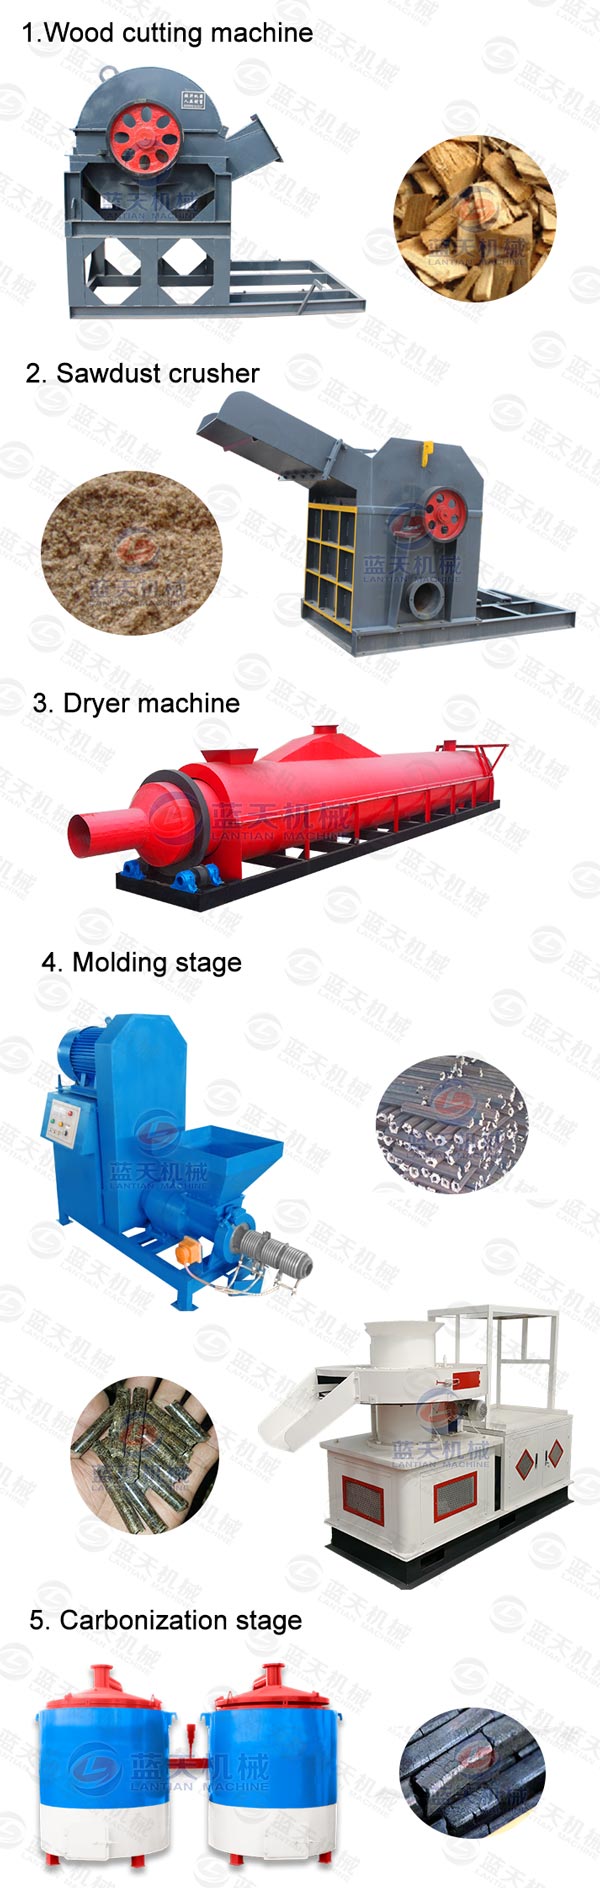 Product lines of wood cutting machine